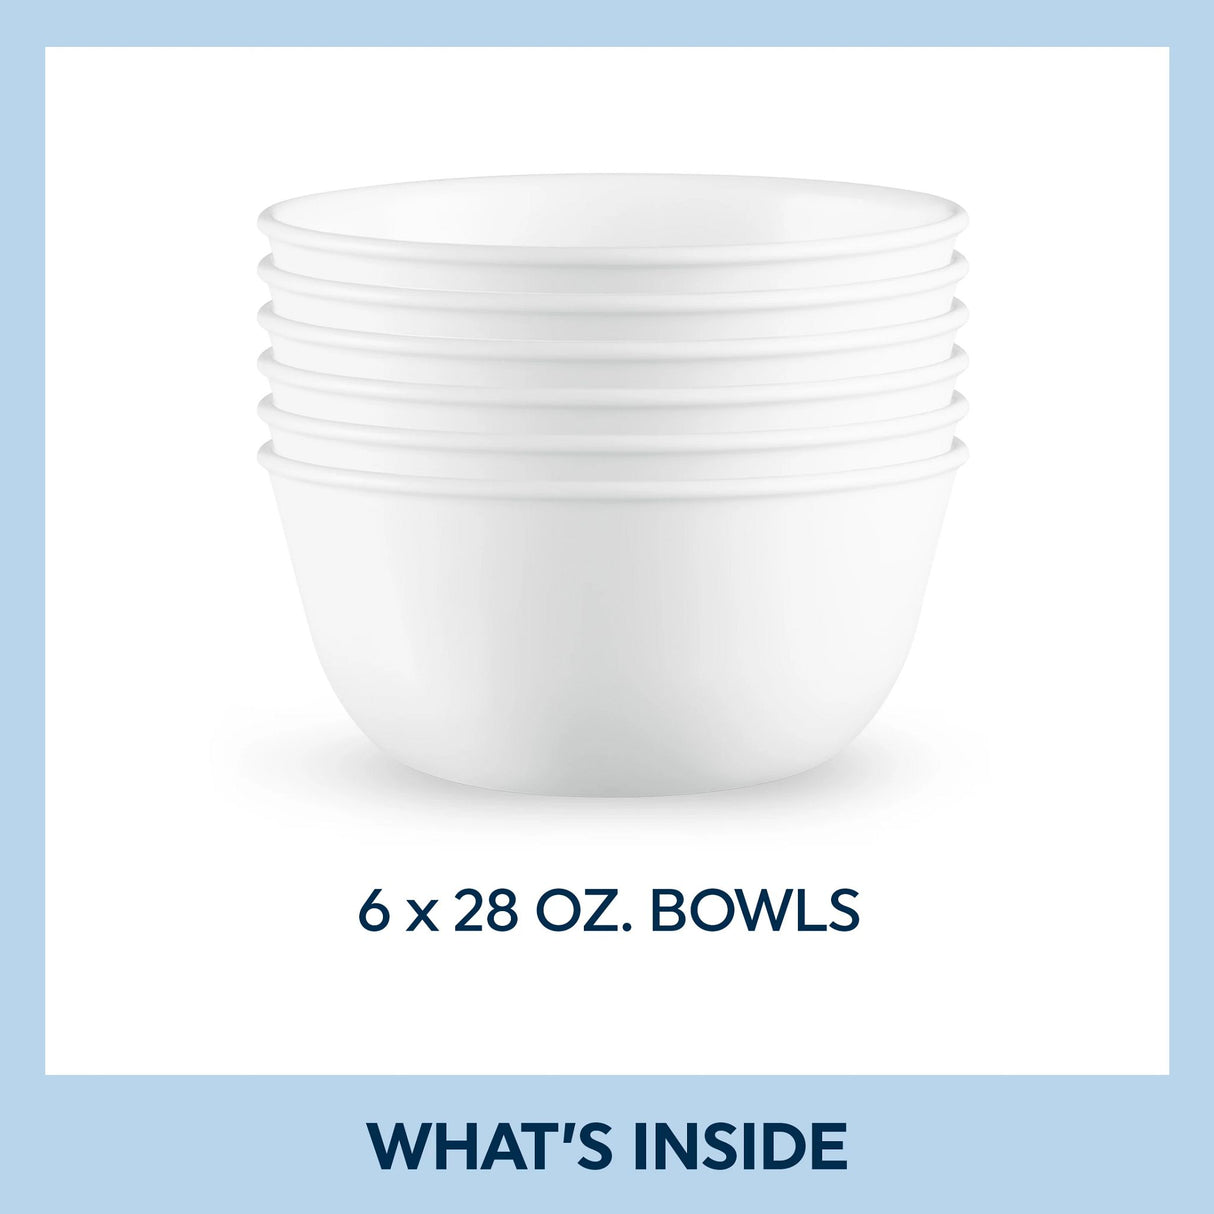  photo of Winter Frost White 28-oz with text what's inside six 28-ounce bowls